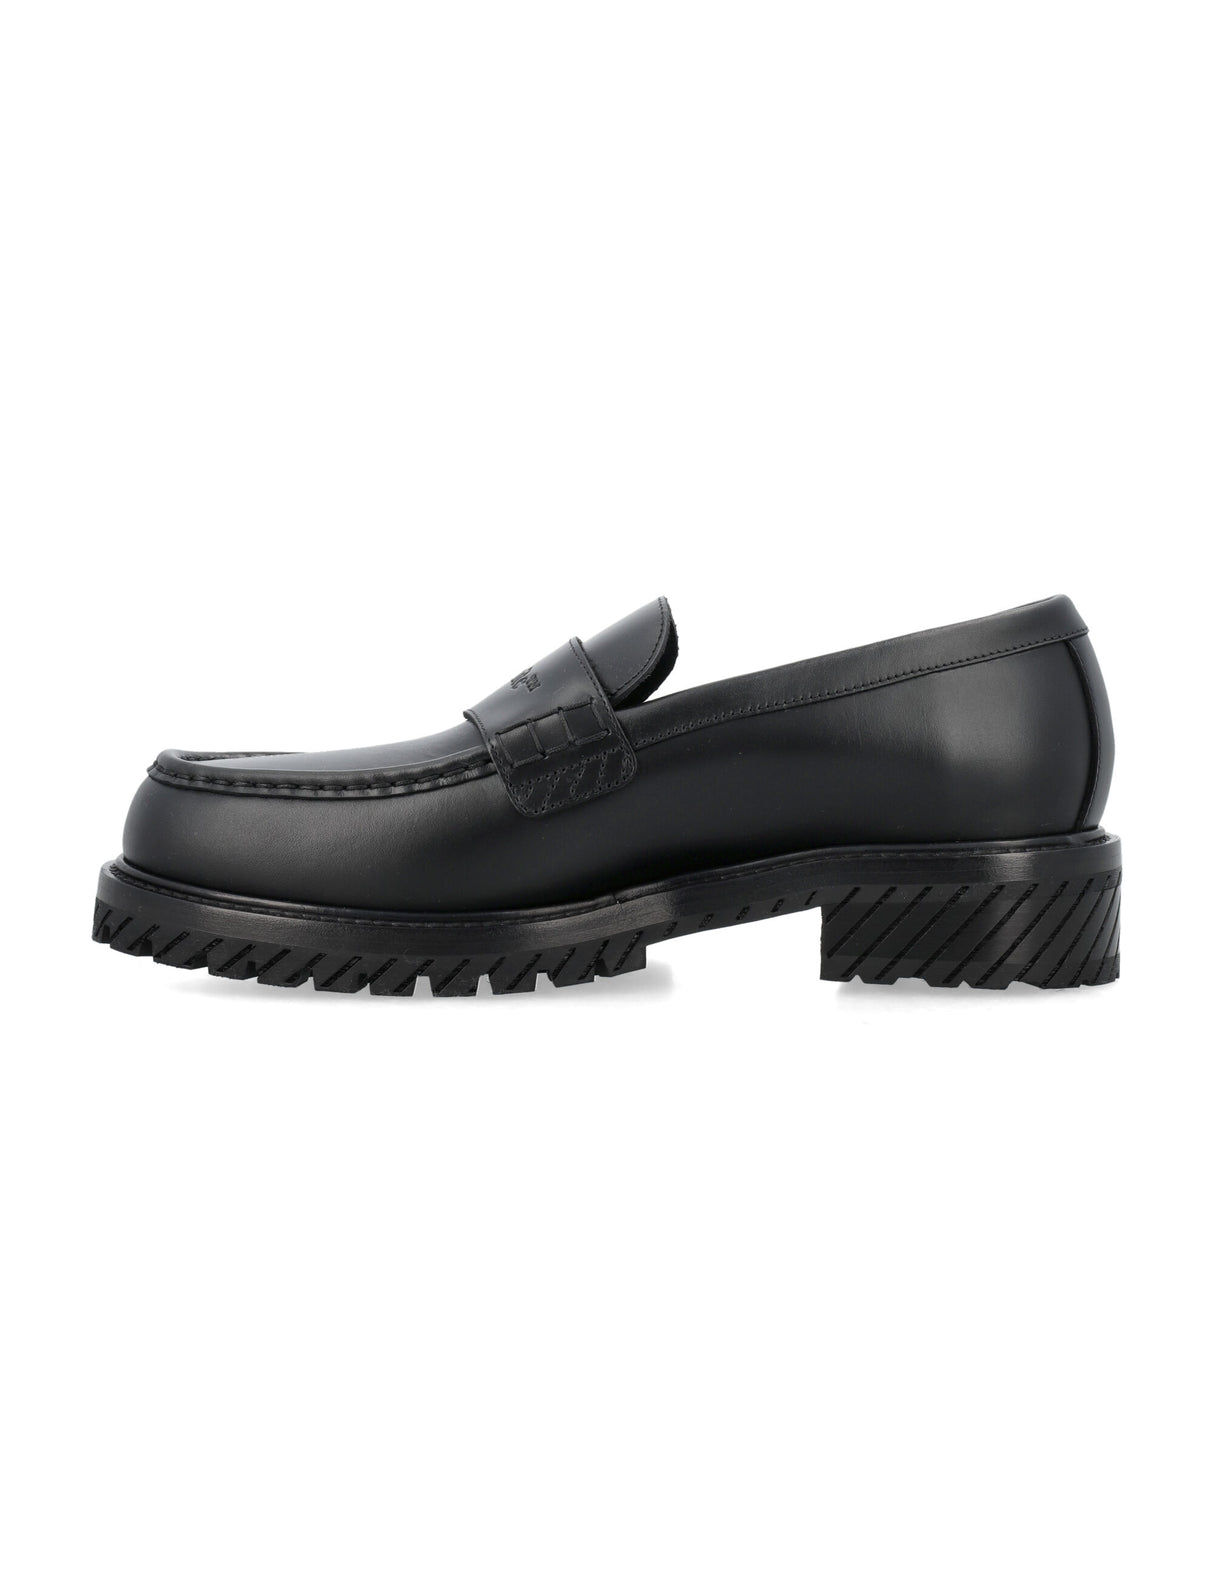 OFF-WHITE Men's Black Leather Military Loafers with Classic Logo and Diagonal Rubber Sole